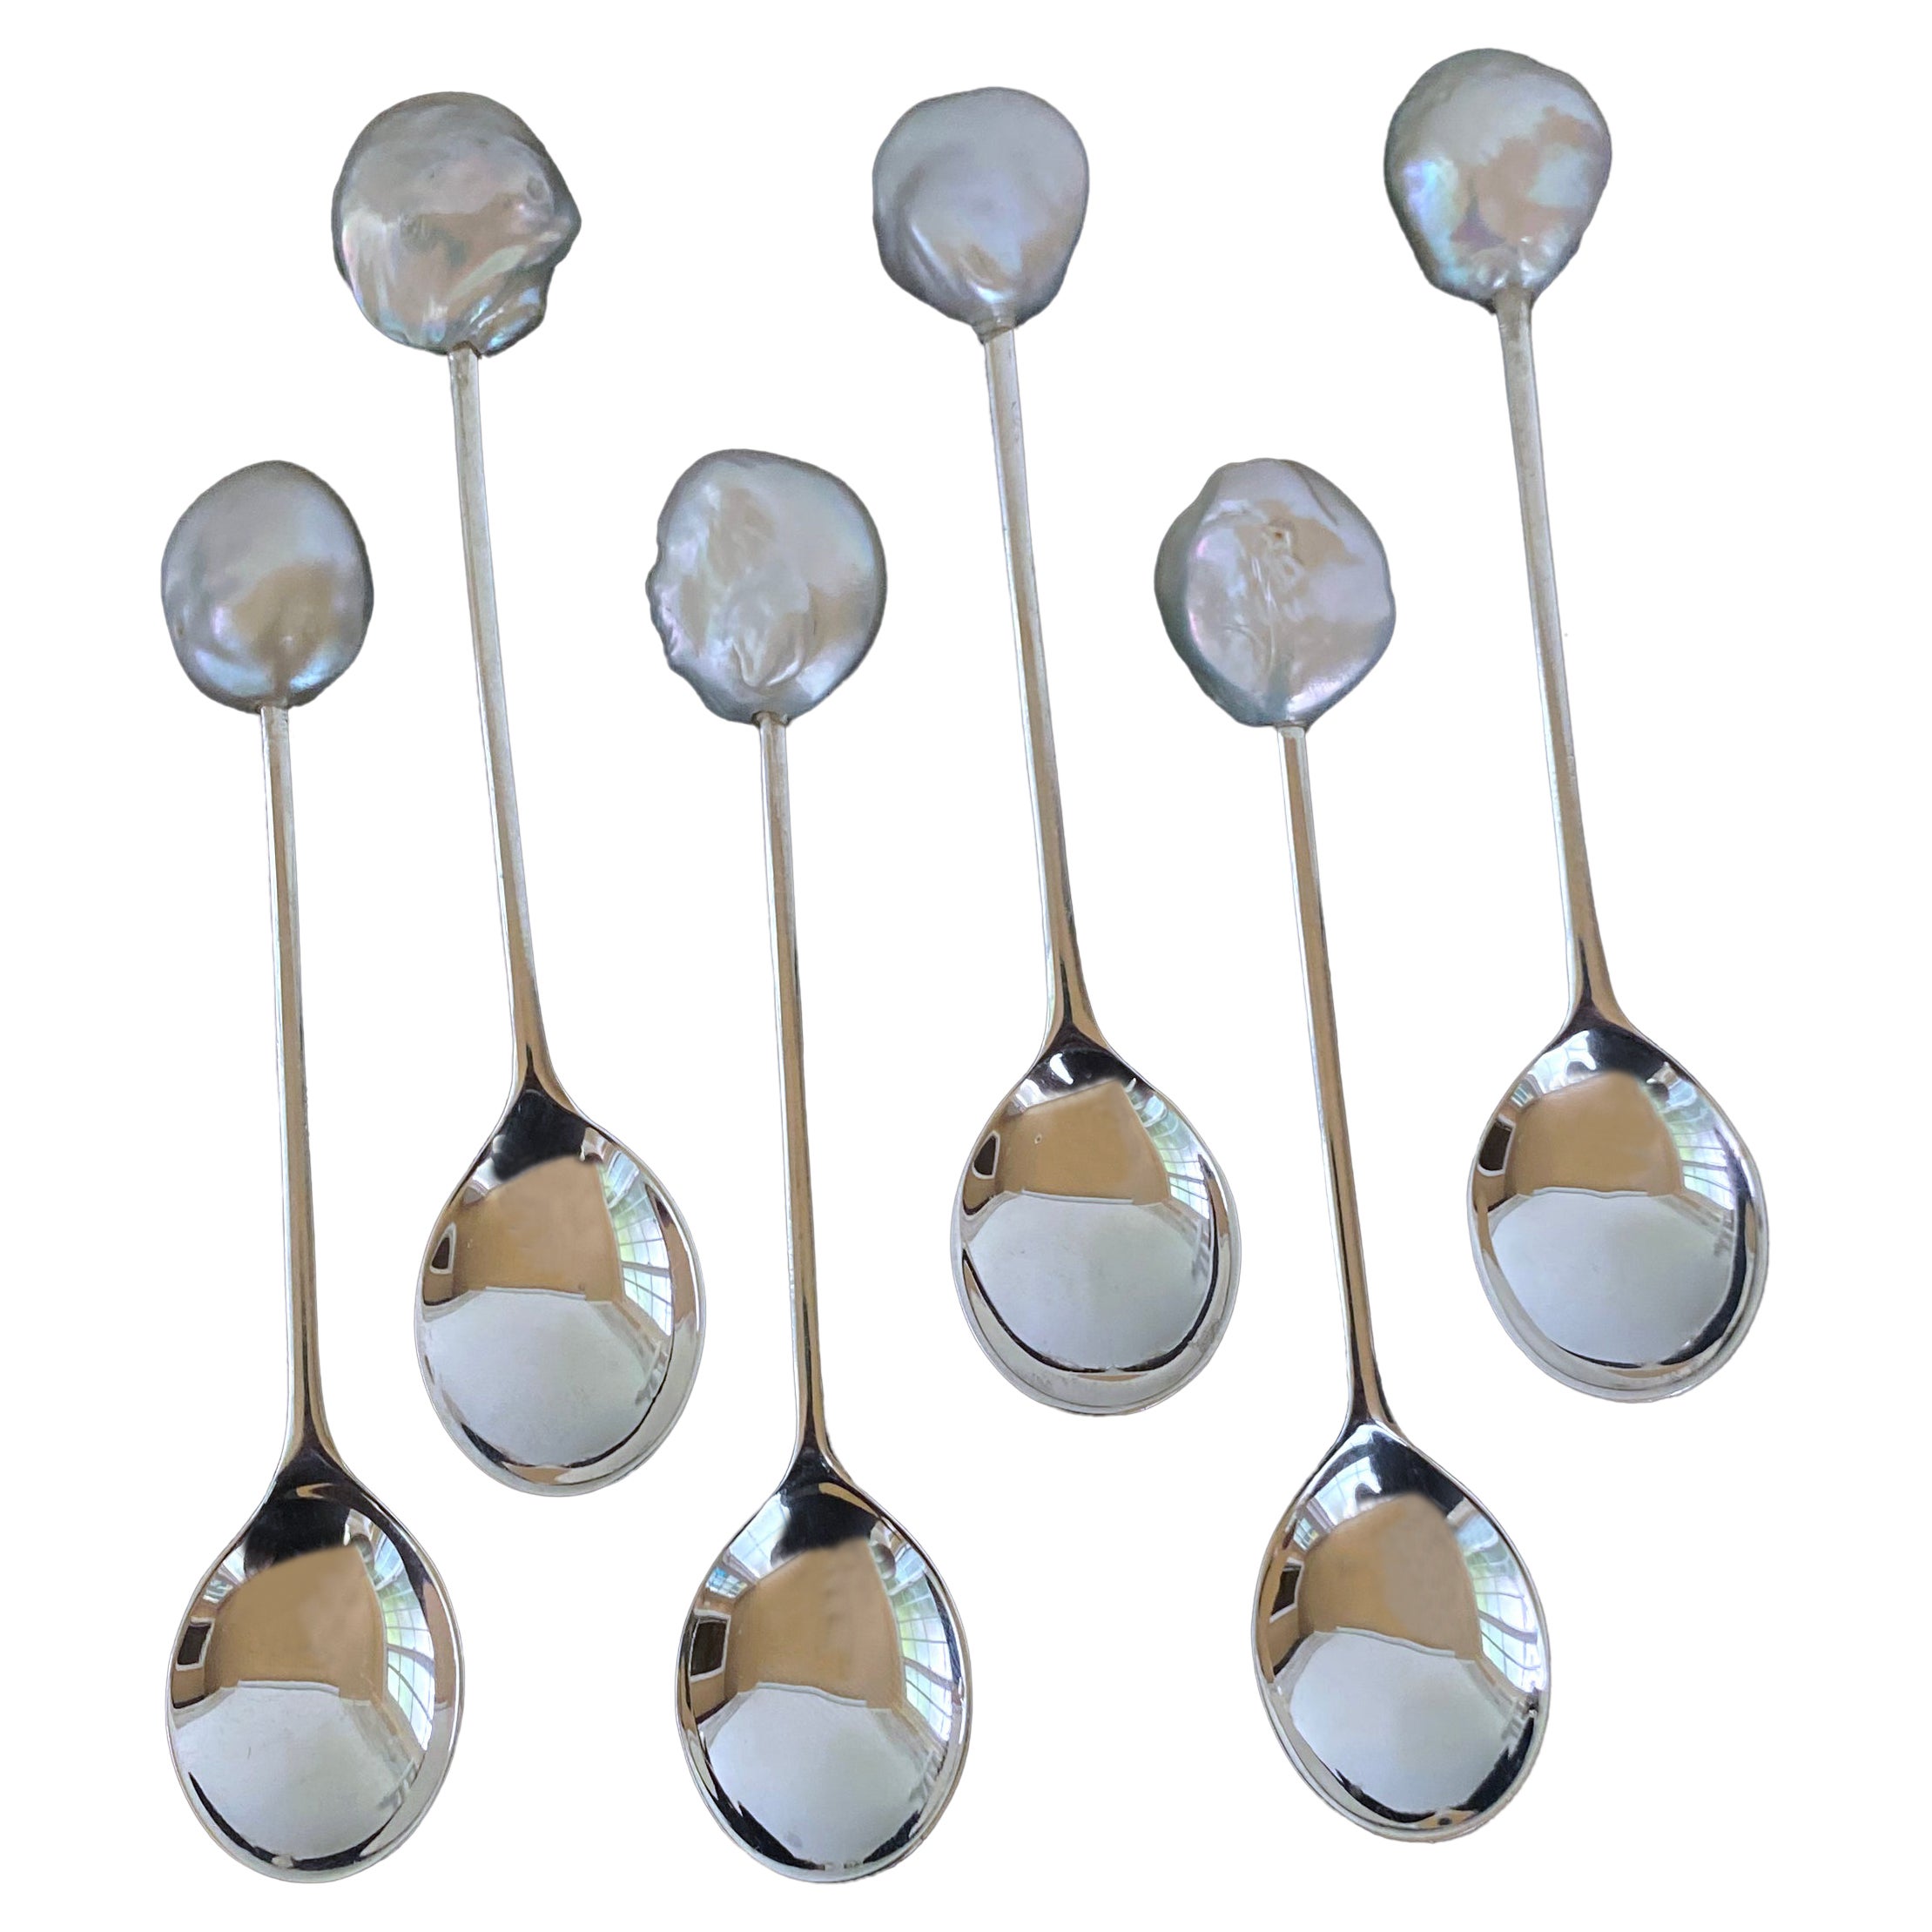 Marina J. Mothers Day Gift, Vintage Silver Plated Spoon Set with Baroque Pearls